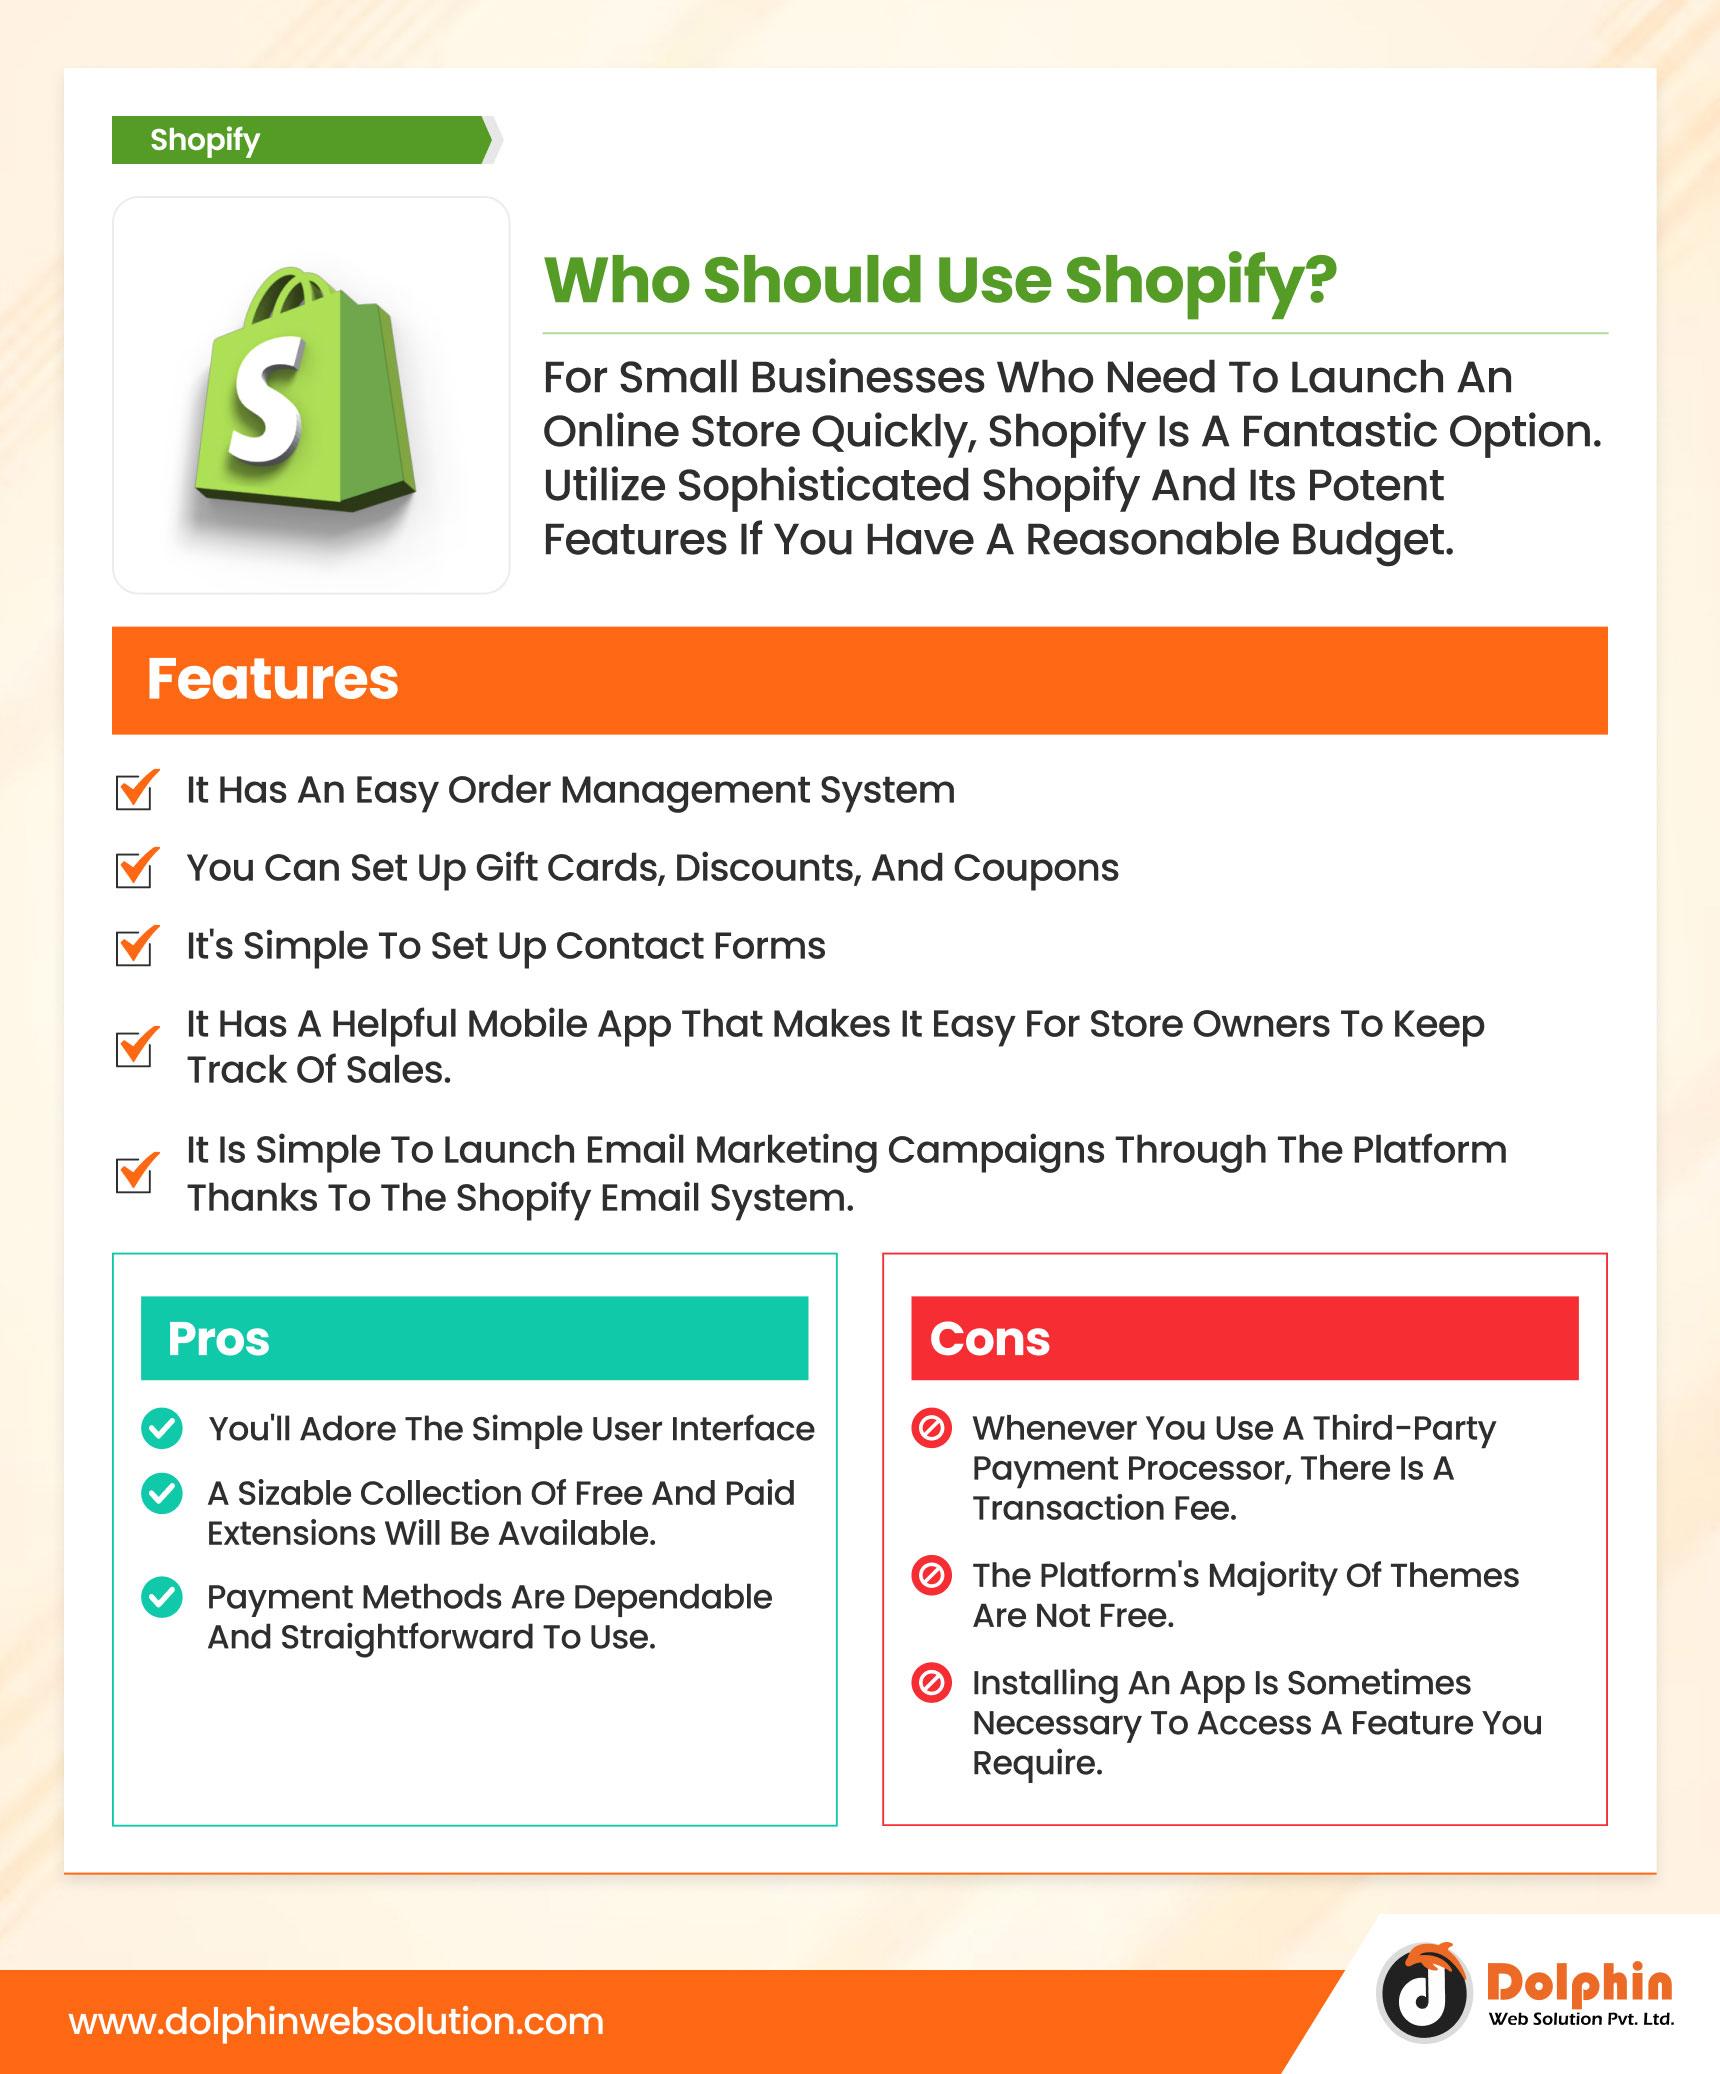 Shopify Pros and Cons